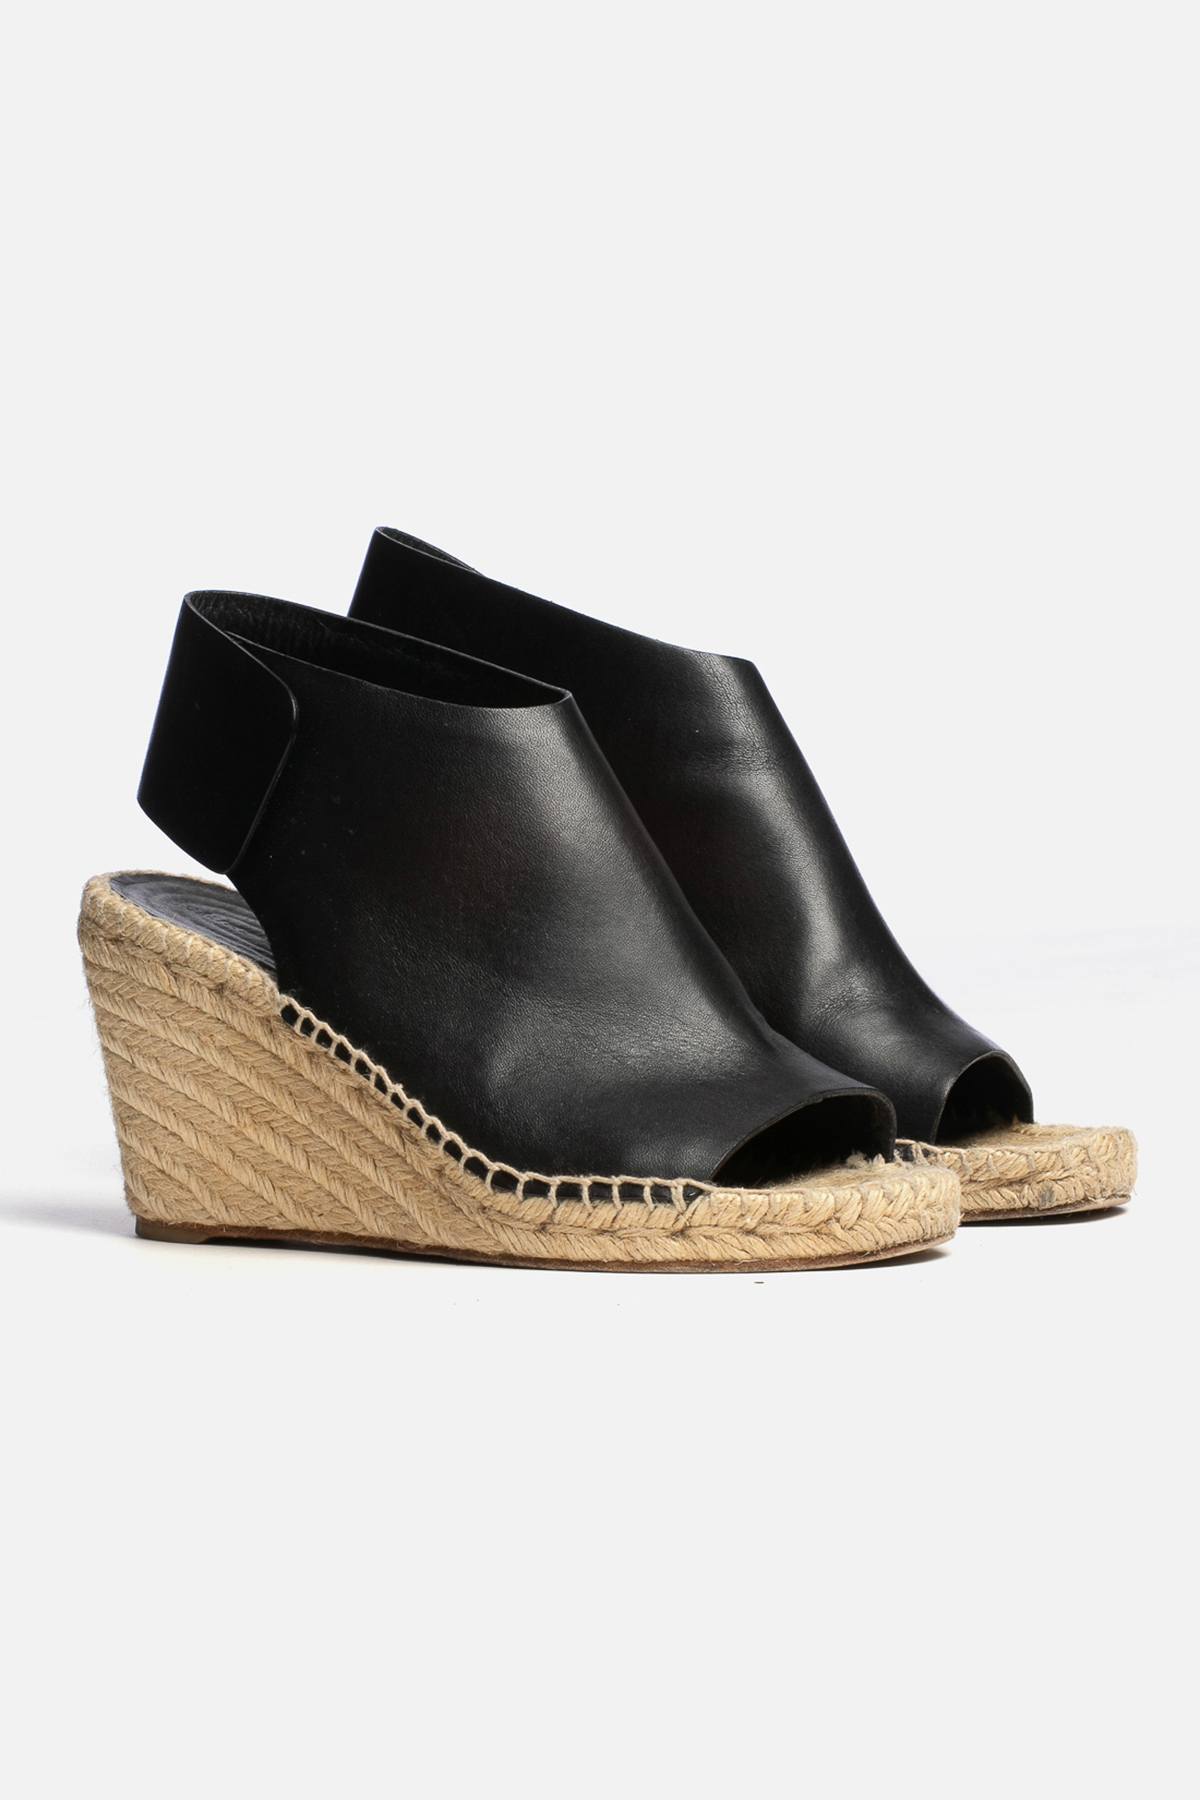 LEATHER ESPADRILLE WEDGES